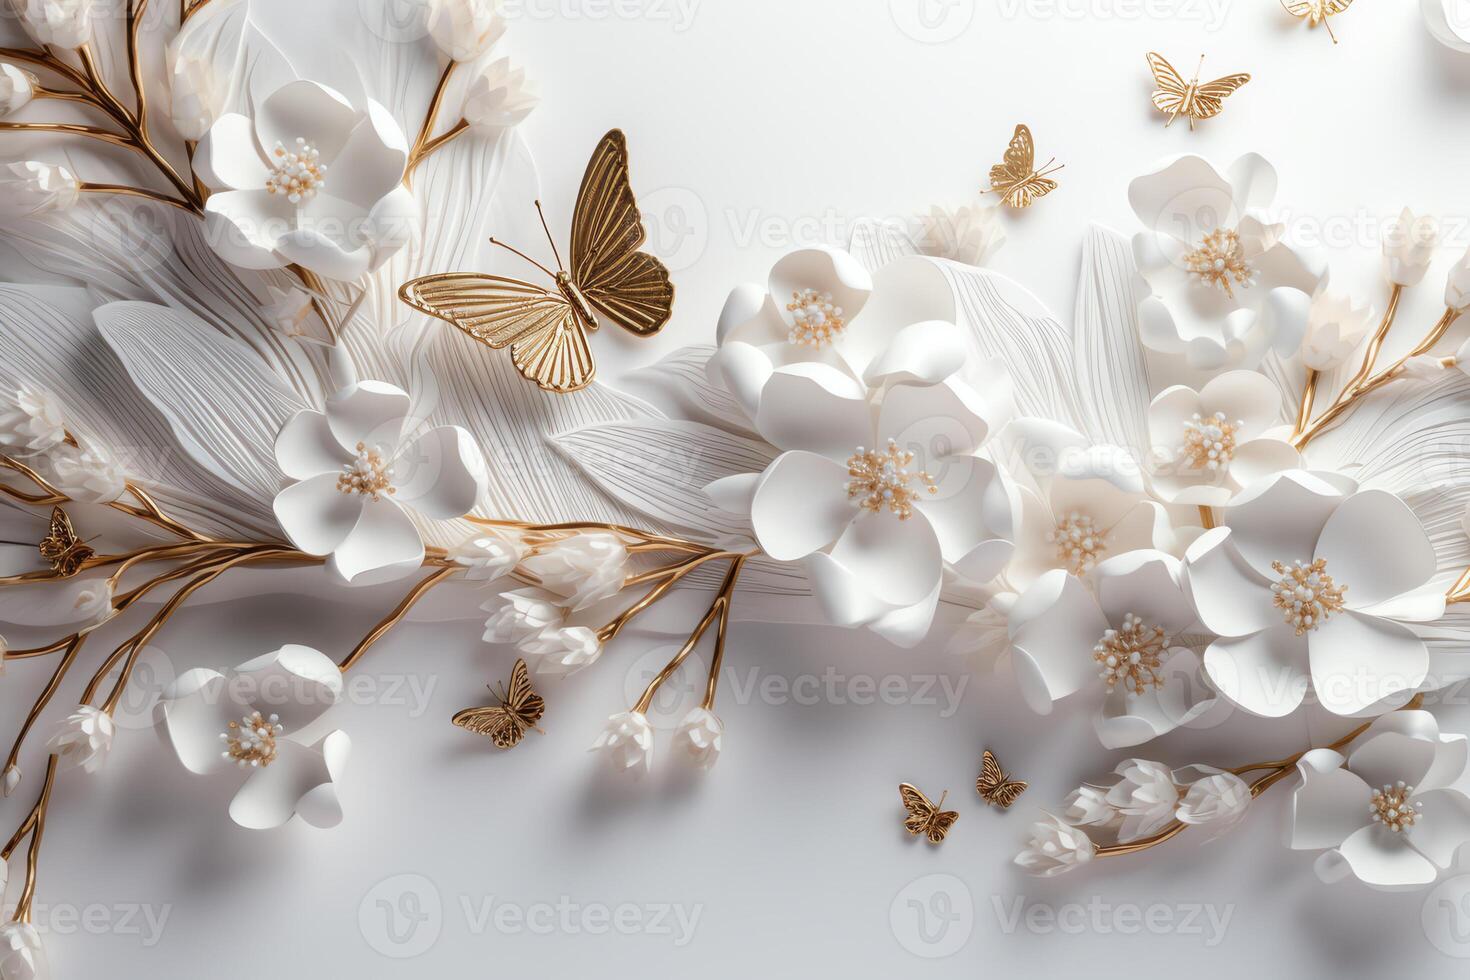 3d White Jewelry Flowers Wallpaper With Golden Branches And Butterflies photo